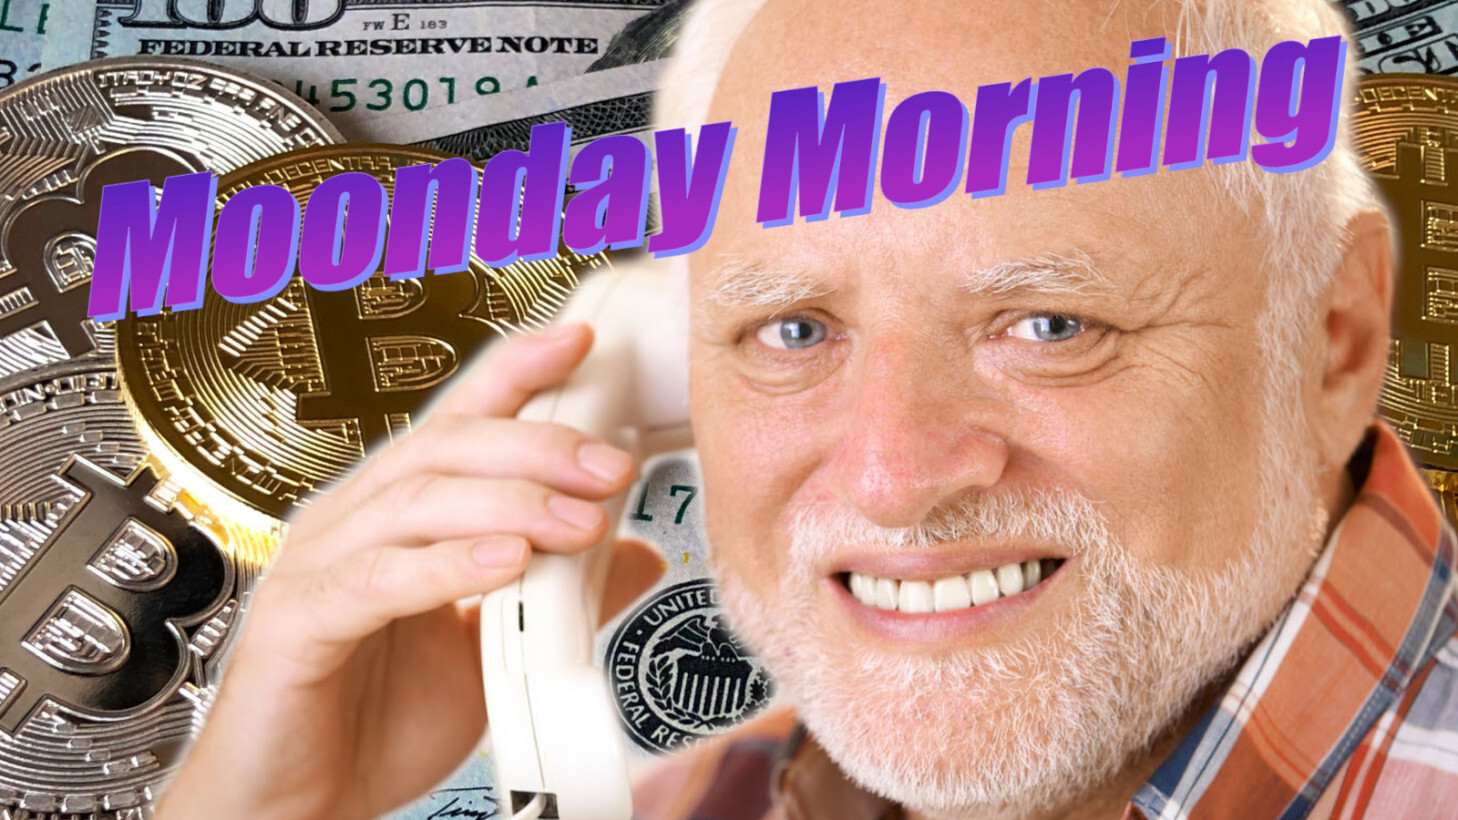 Moonday Mornings: Cryptocurrency market at 5-month high, Paxful under fire, and more